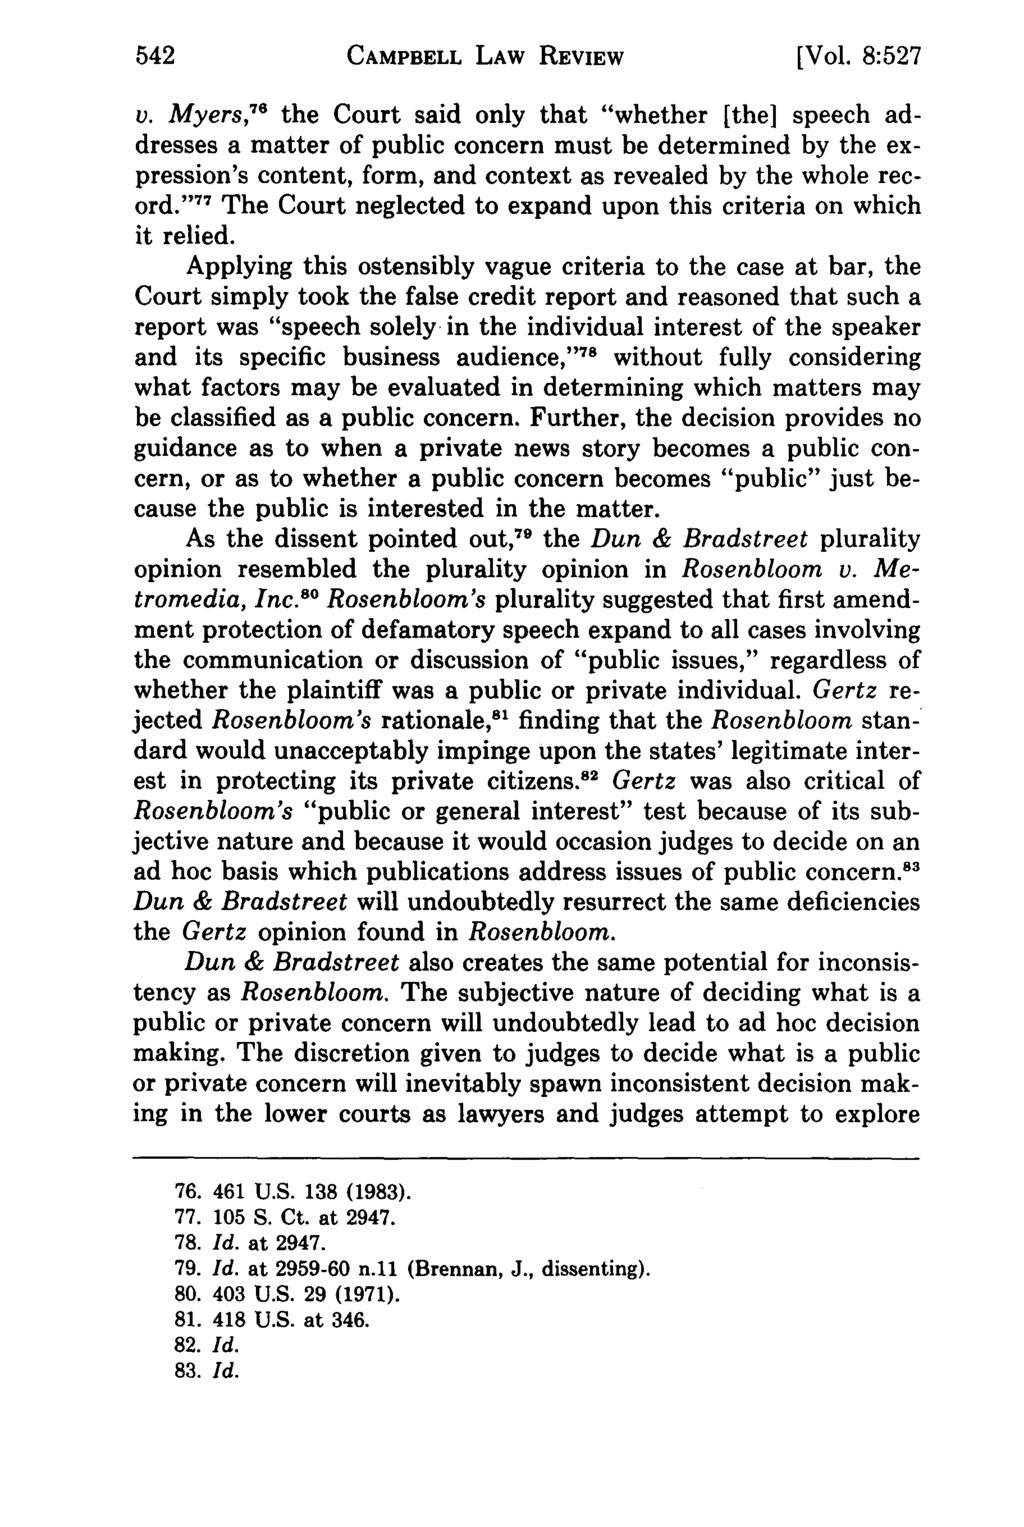 Campbell CAMPBELL Law Review, LAW Vol. 8, REVIEW Iss. 3 [1986], Art. 7 [Vol. 8:527 v.